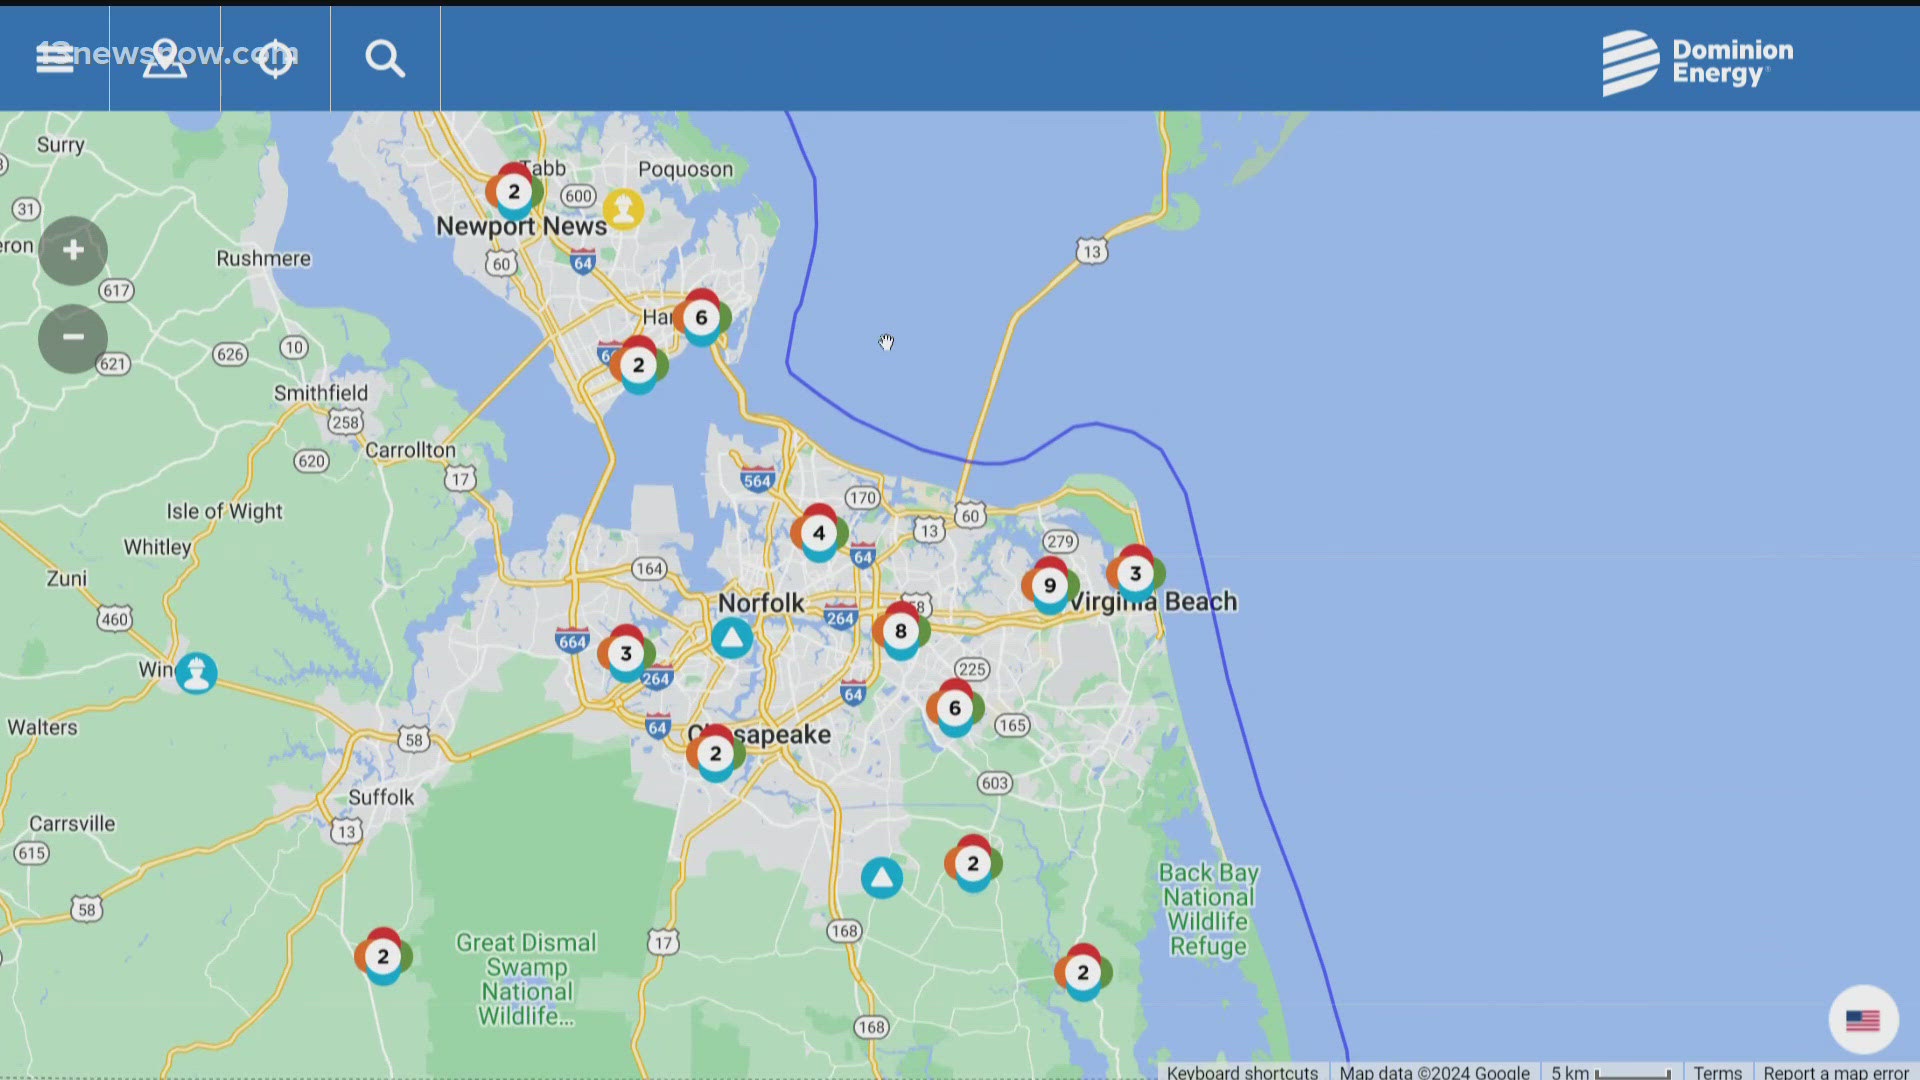 We're also keeping an eye on outages happening across Hampton Roads.